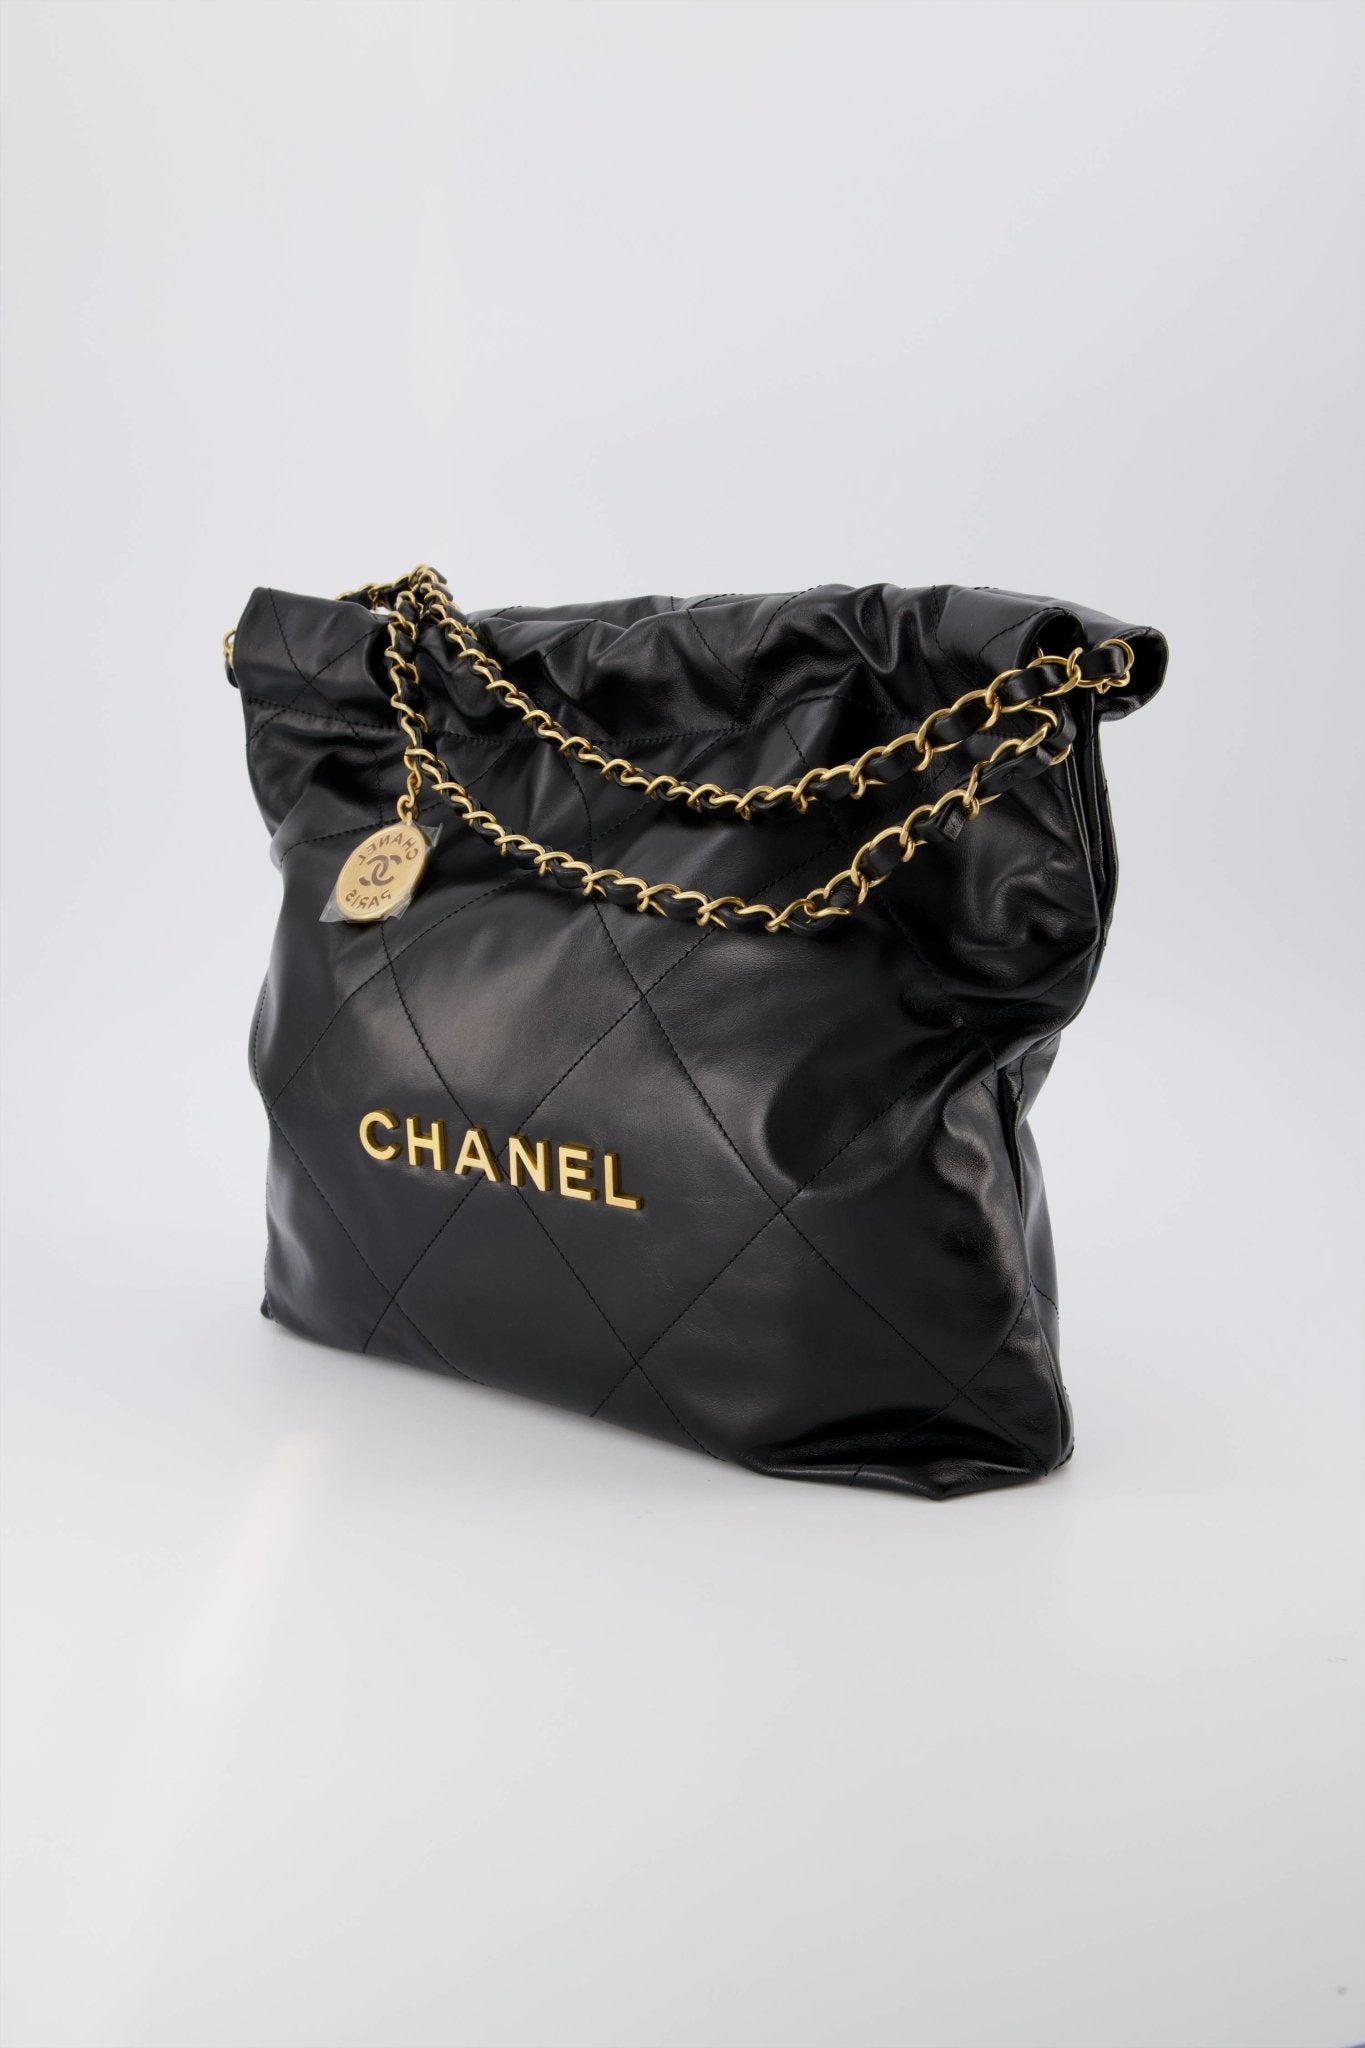 Comprehensive Guide to Buying Authentic Vintage Chanel Bags